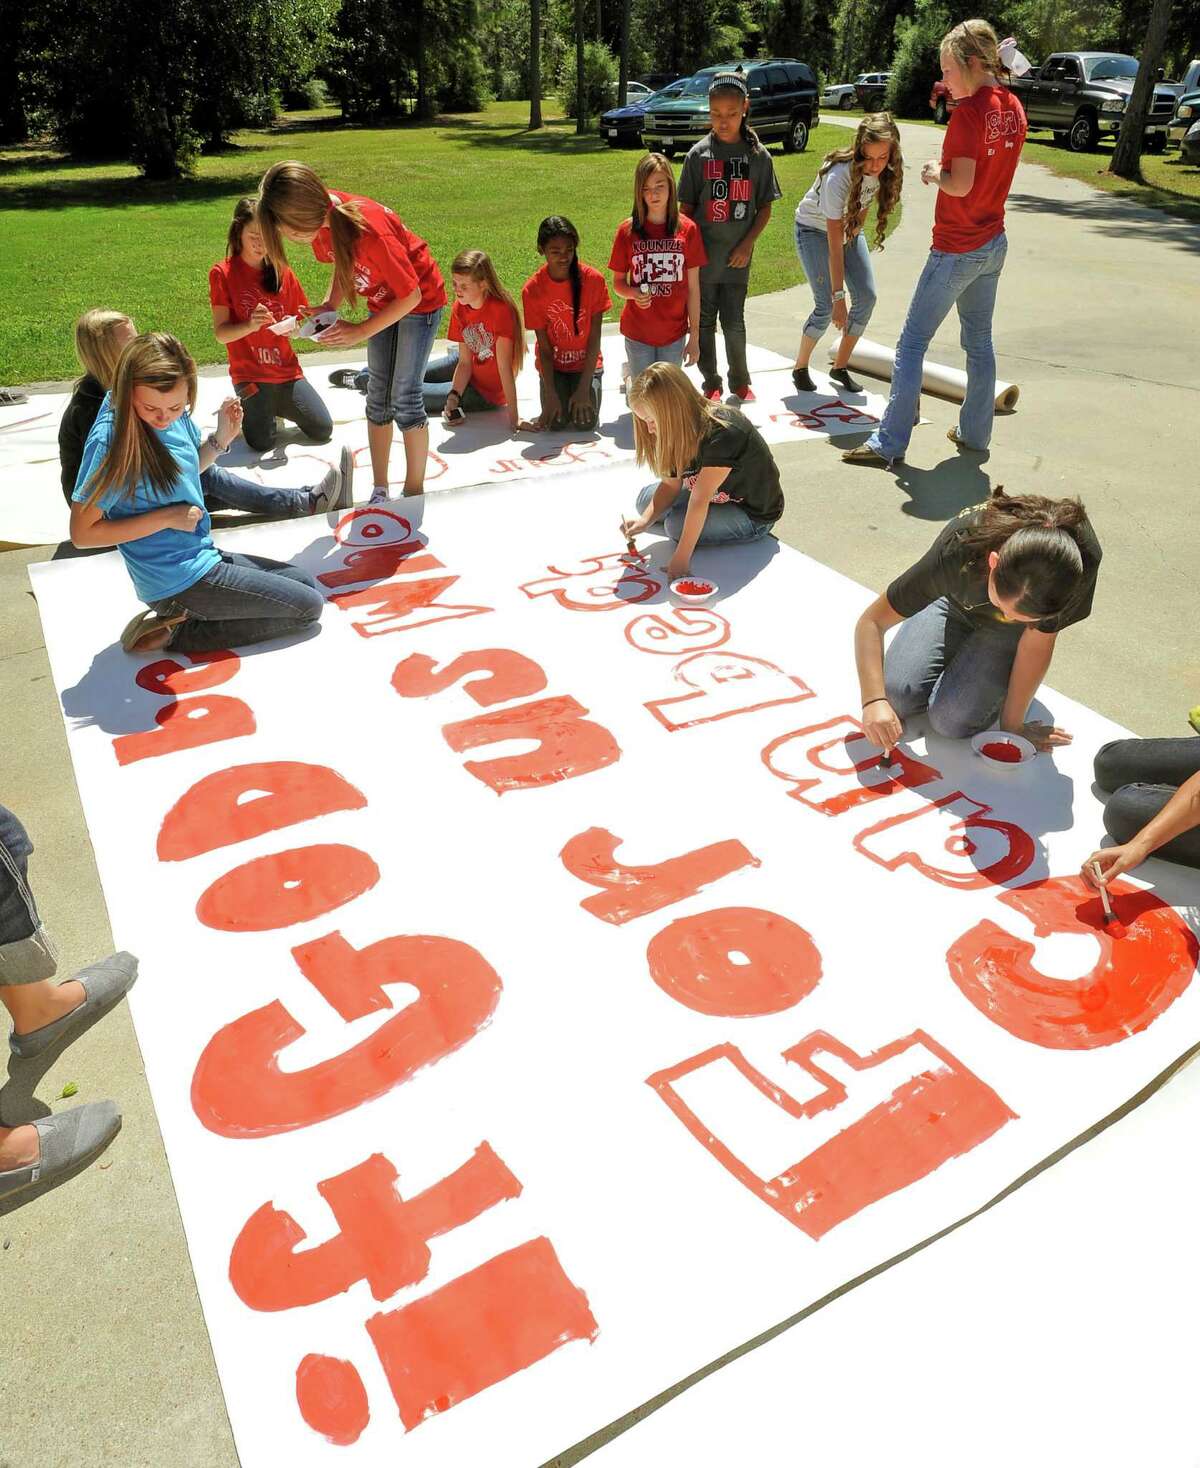 File - In this Sept. 19, 2012 file photo, Kountze High School cheerleaders and other children work on a large sign in Kountze, Texas. Texas Attorney General Greg Abbott announced Wednesday that he is intervening in a lawsuit that cheerleaders filed against the school district. The district told the cheerleaders to stop using Bible verses at football games after the Freedom From Religion Foundation complained. (AP Photo/The Beaumont Enterprise, Dave Ryan, File)